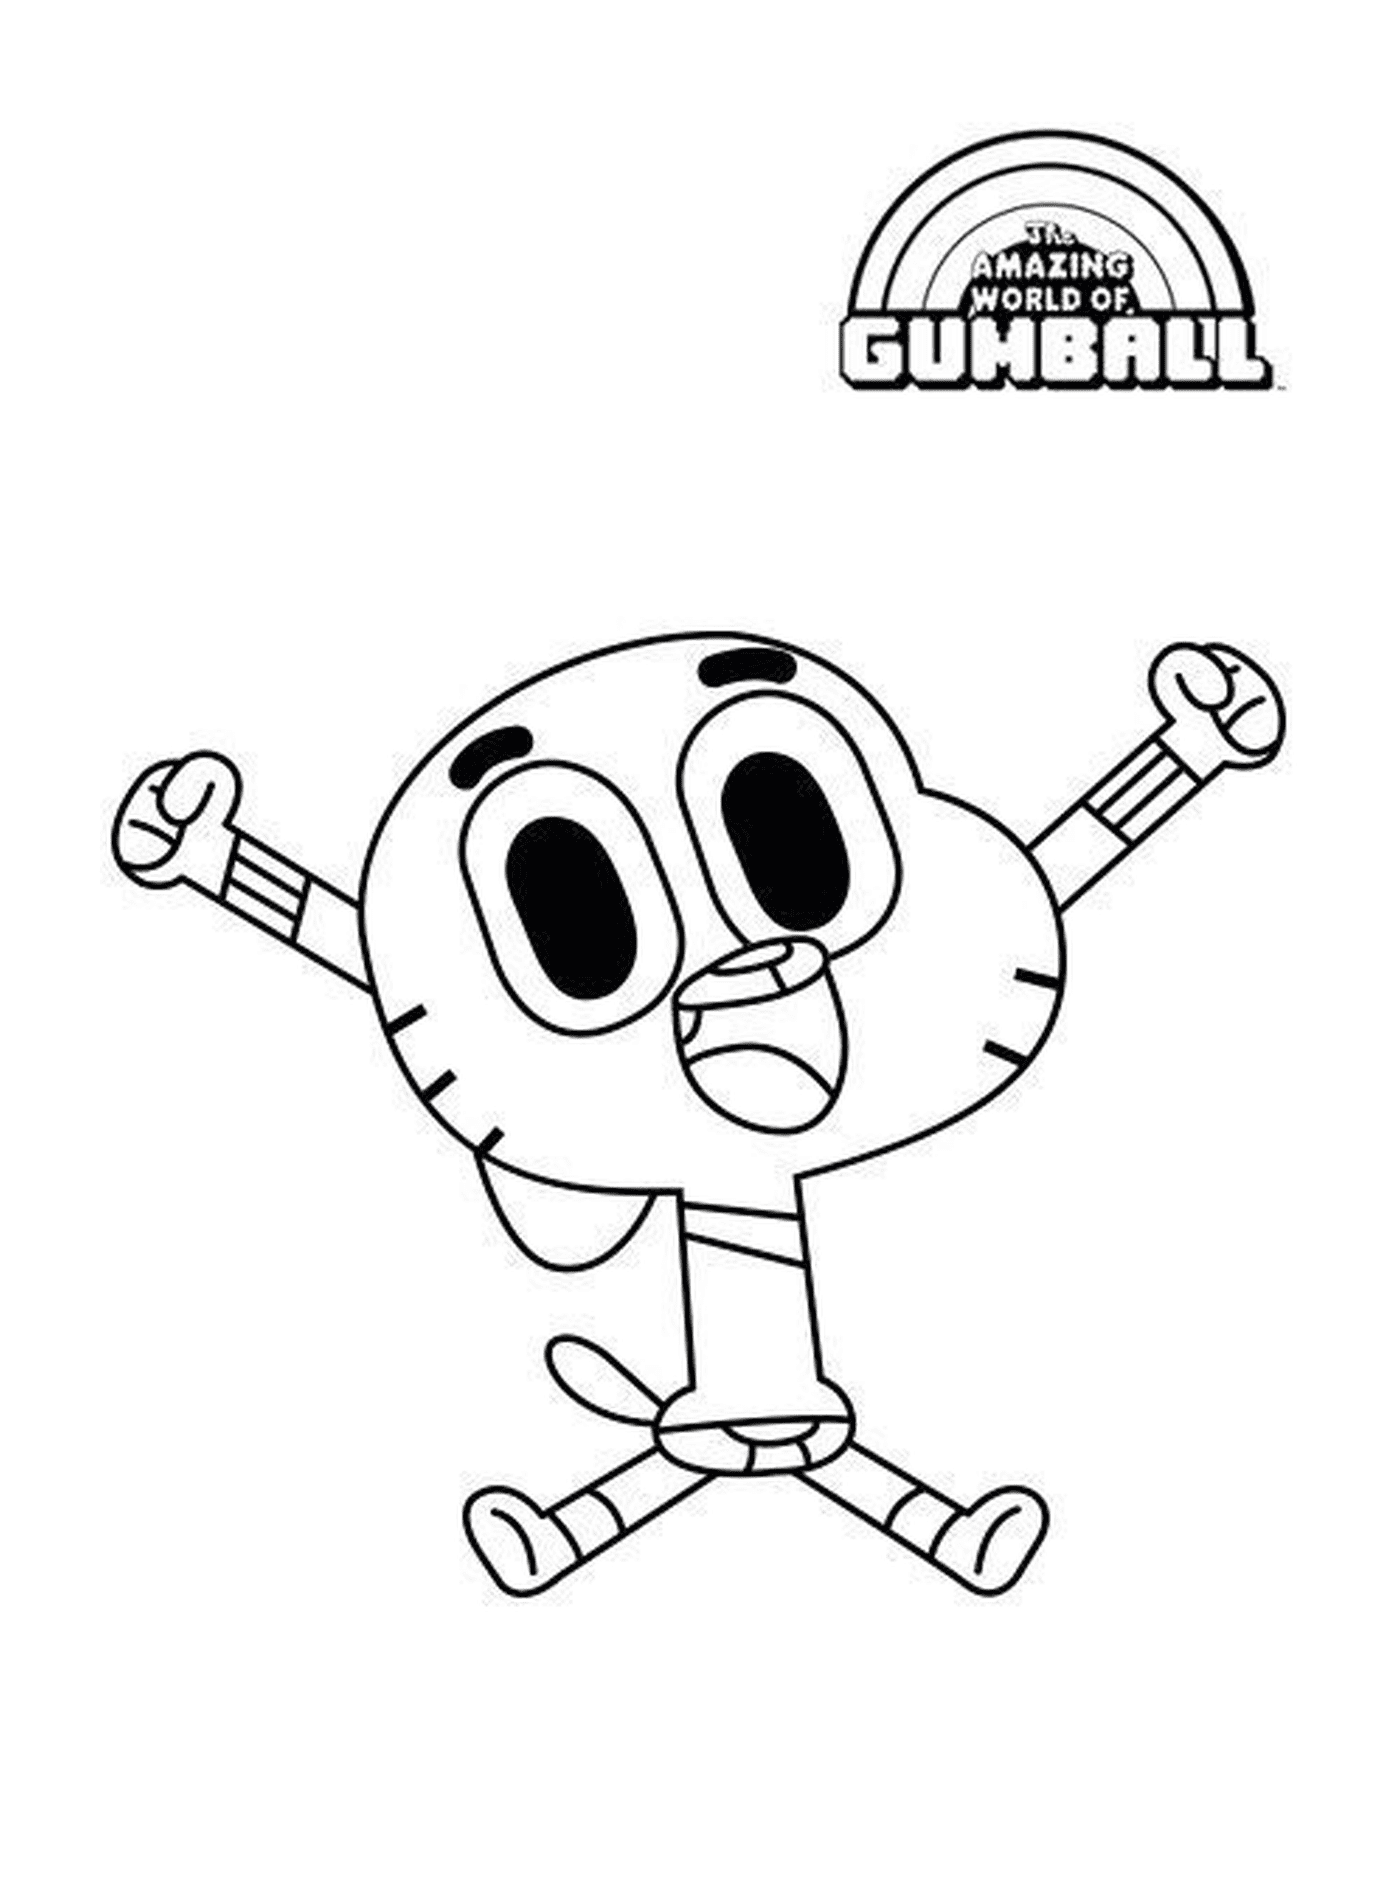   Gumball, le personnage attachant 